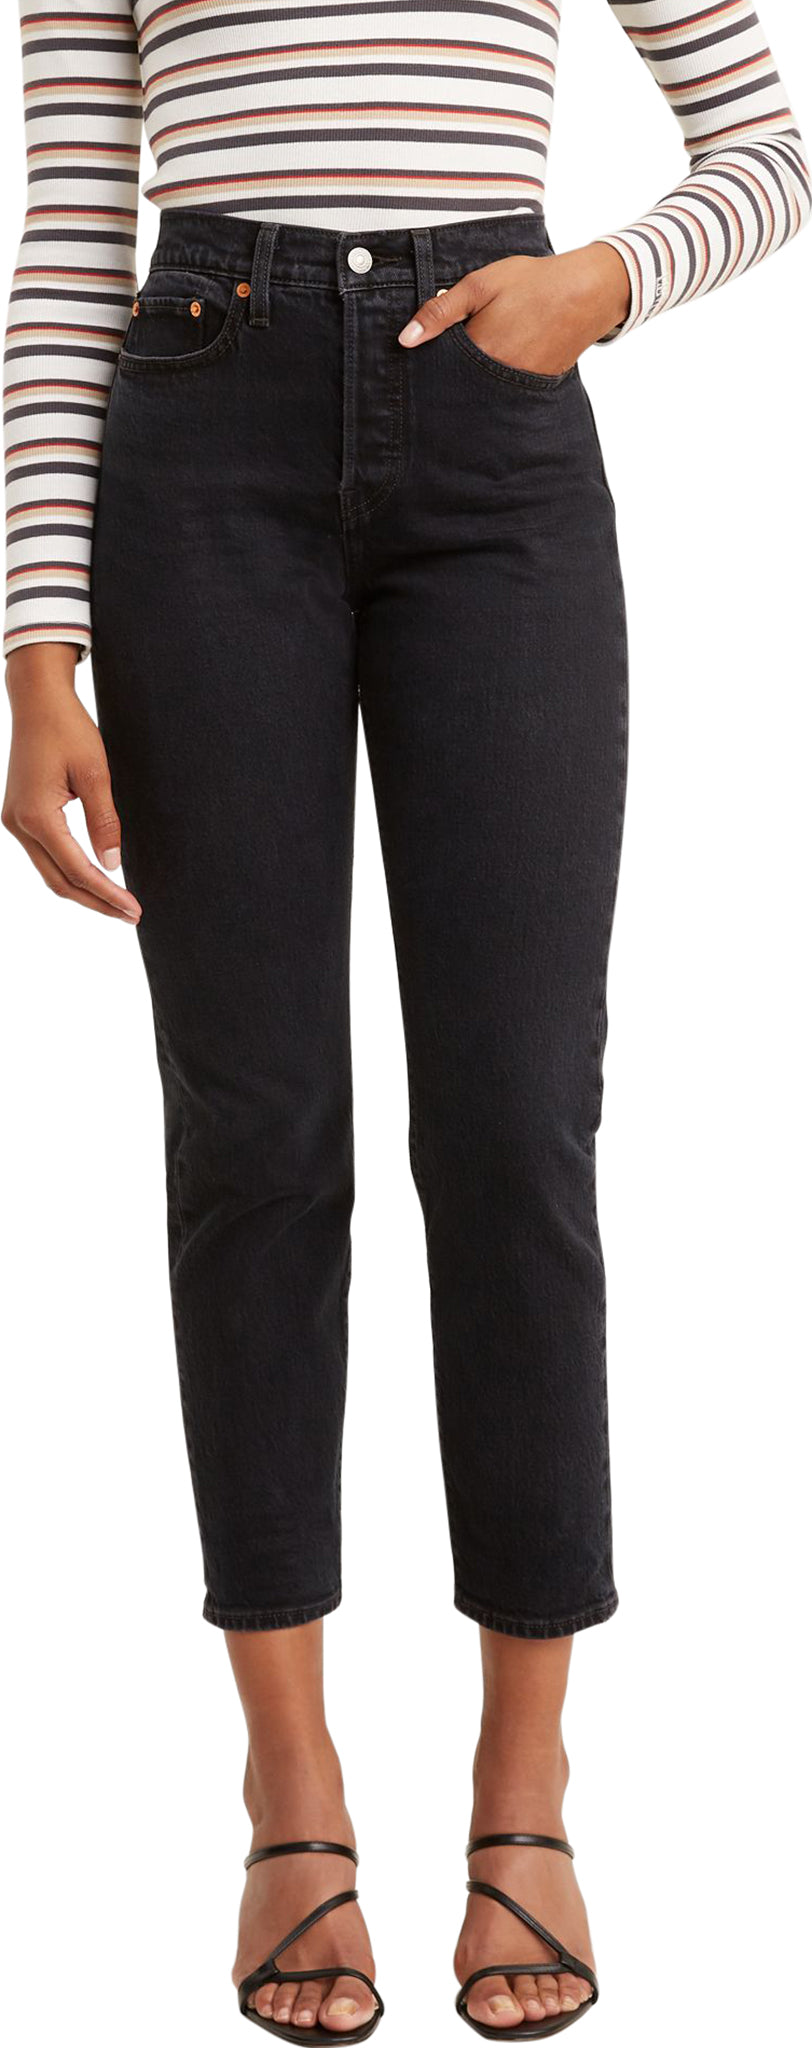 Levi's Wedgie Icon Fit Jeans - Women's | Altitude Sports